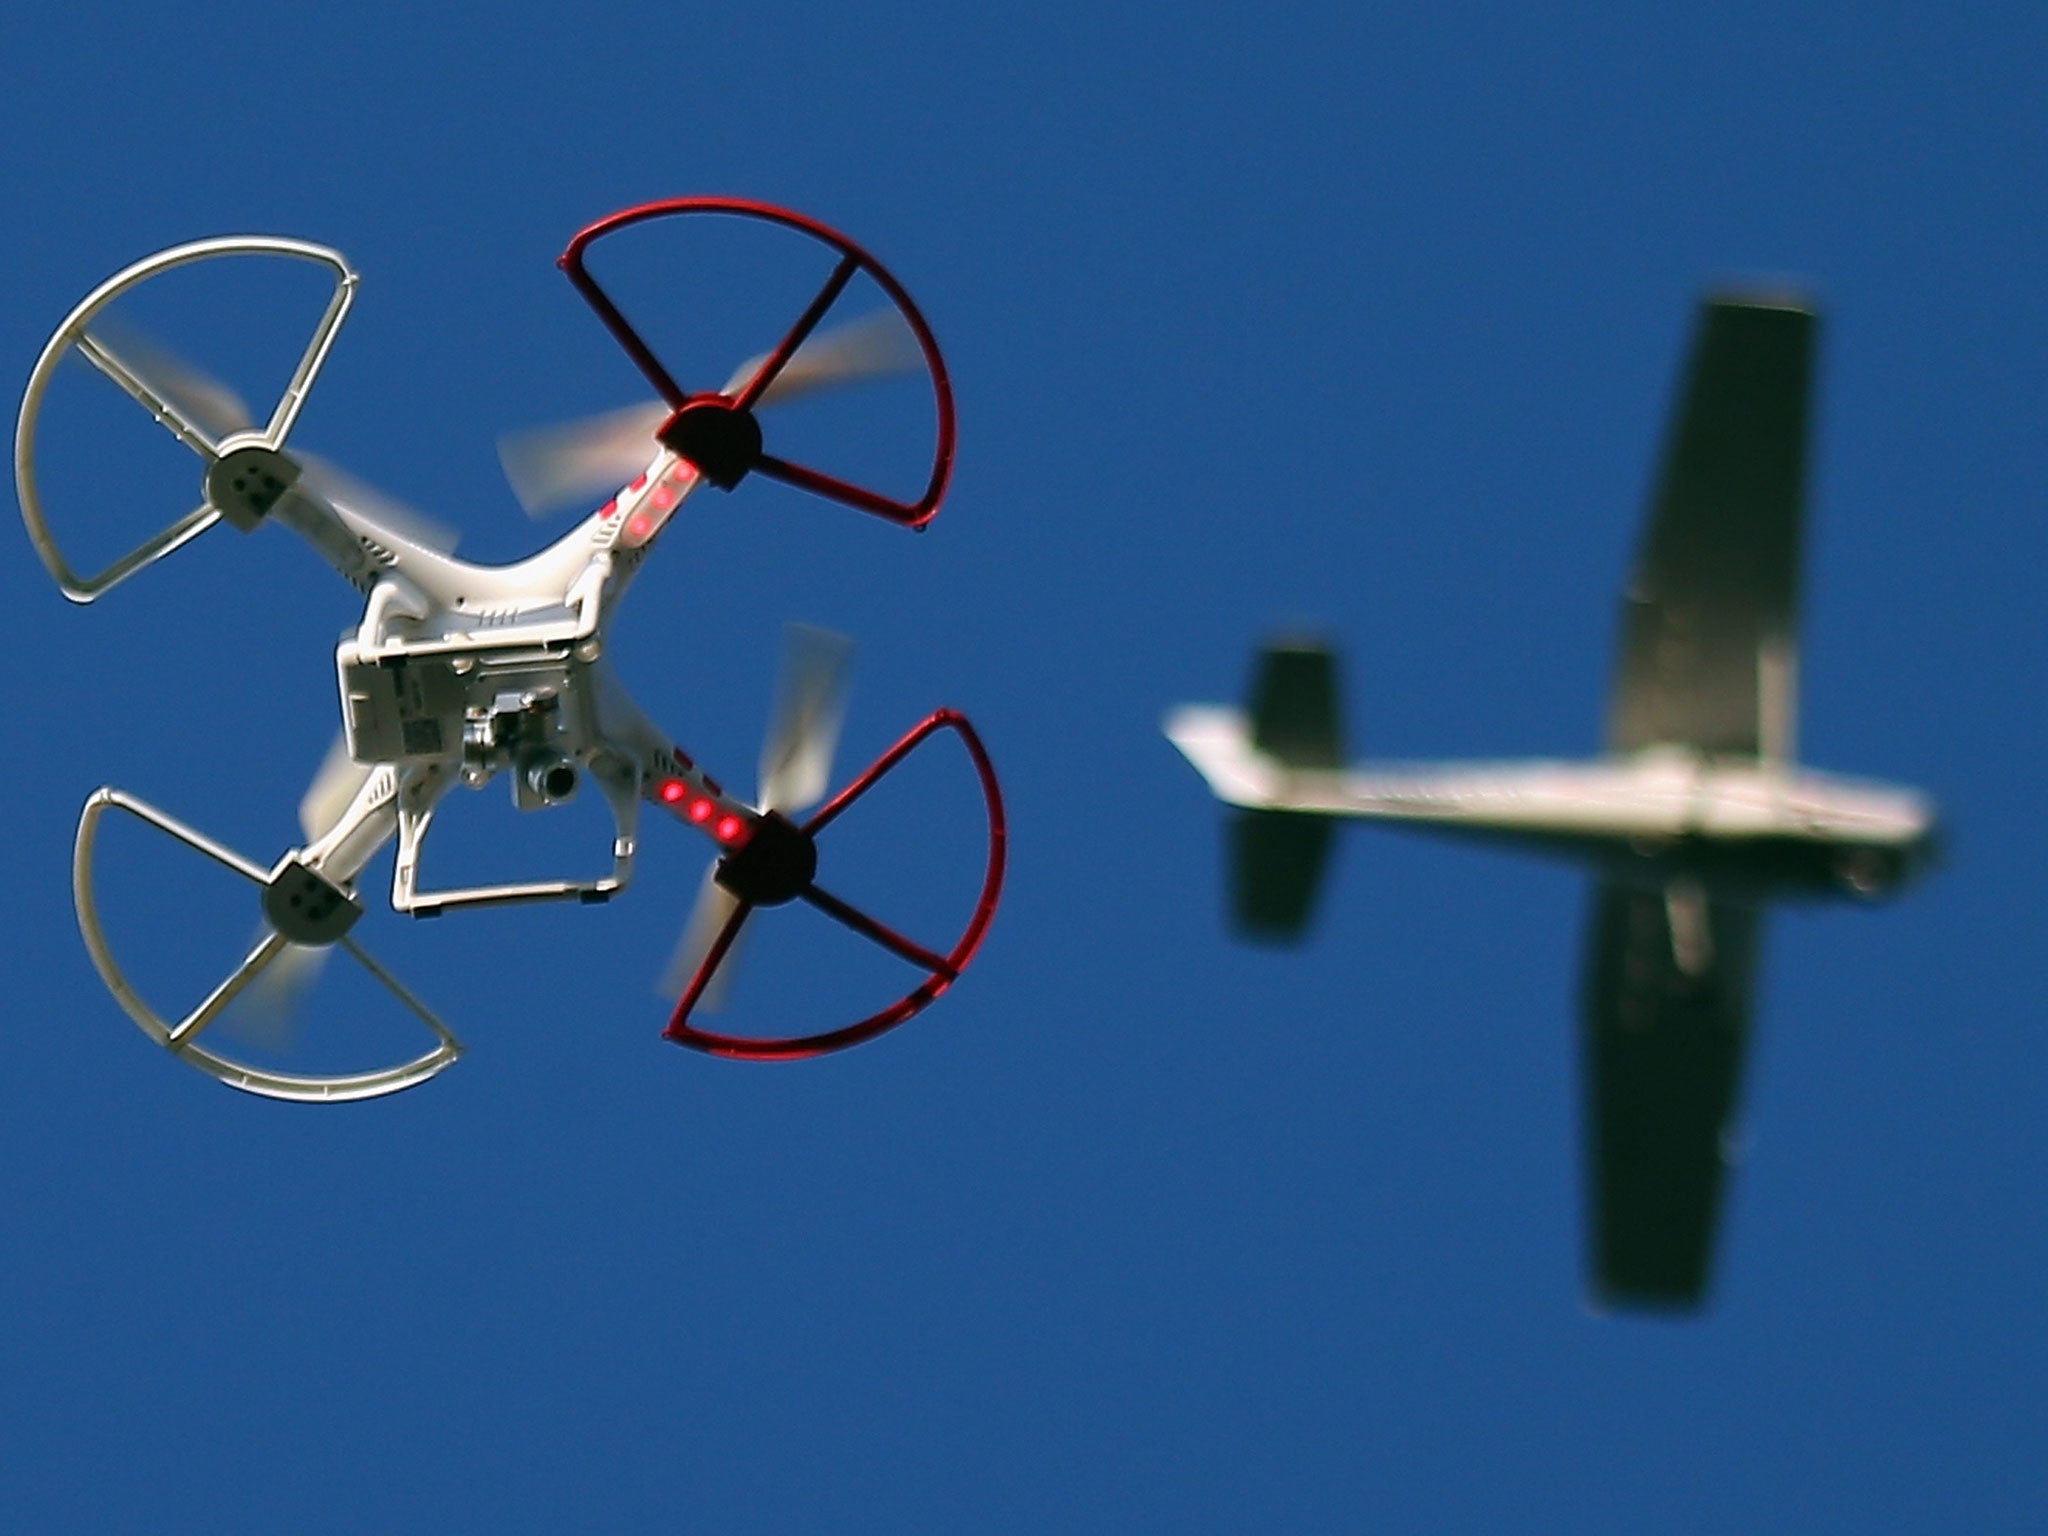 Drone pilots can be prosecuted if they fly their drone beyond their line of sight